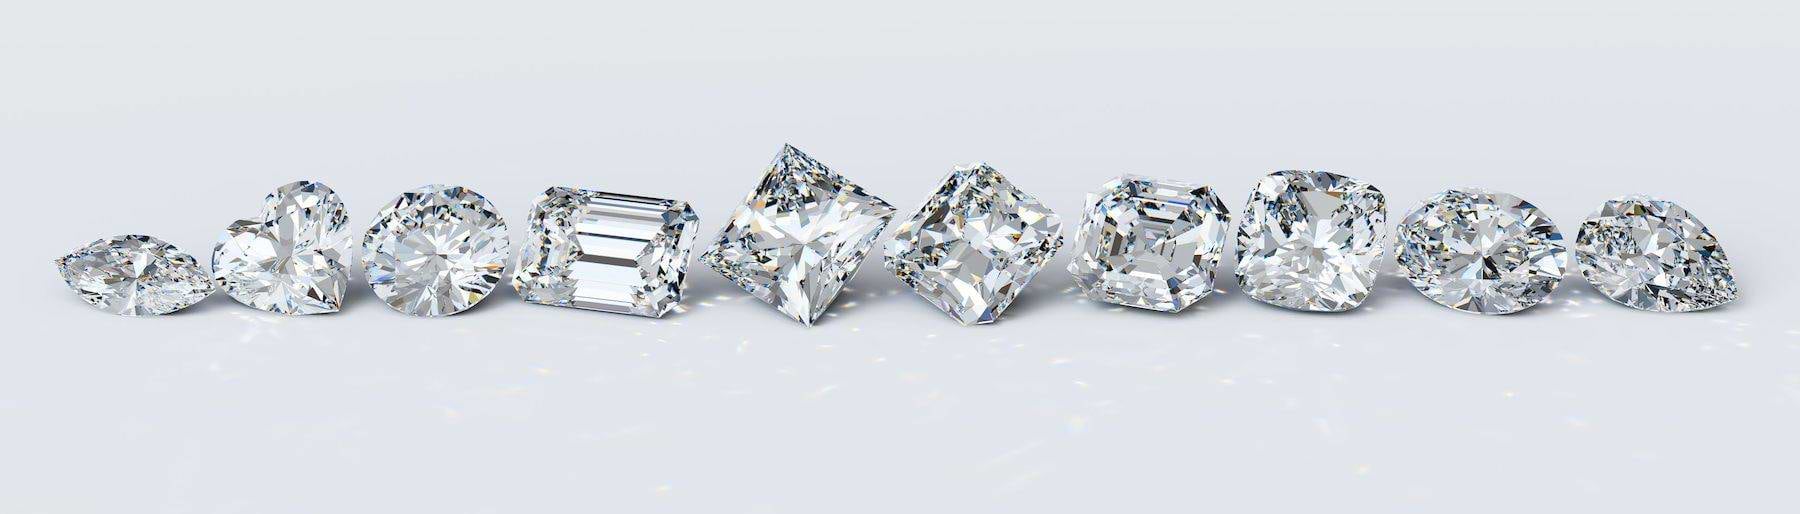 The Science Behind The Lab Grown Diamond